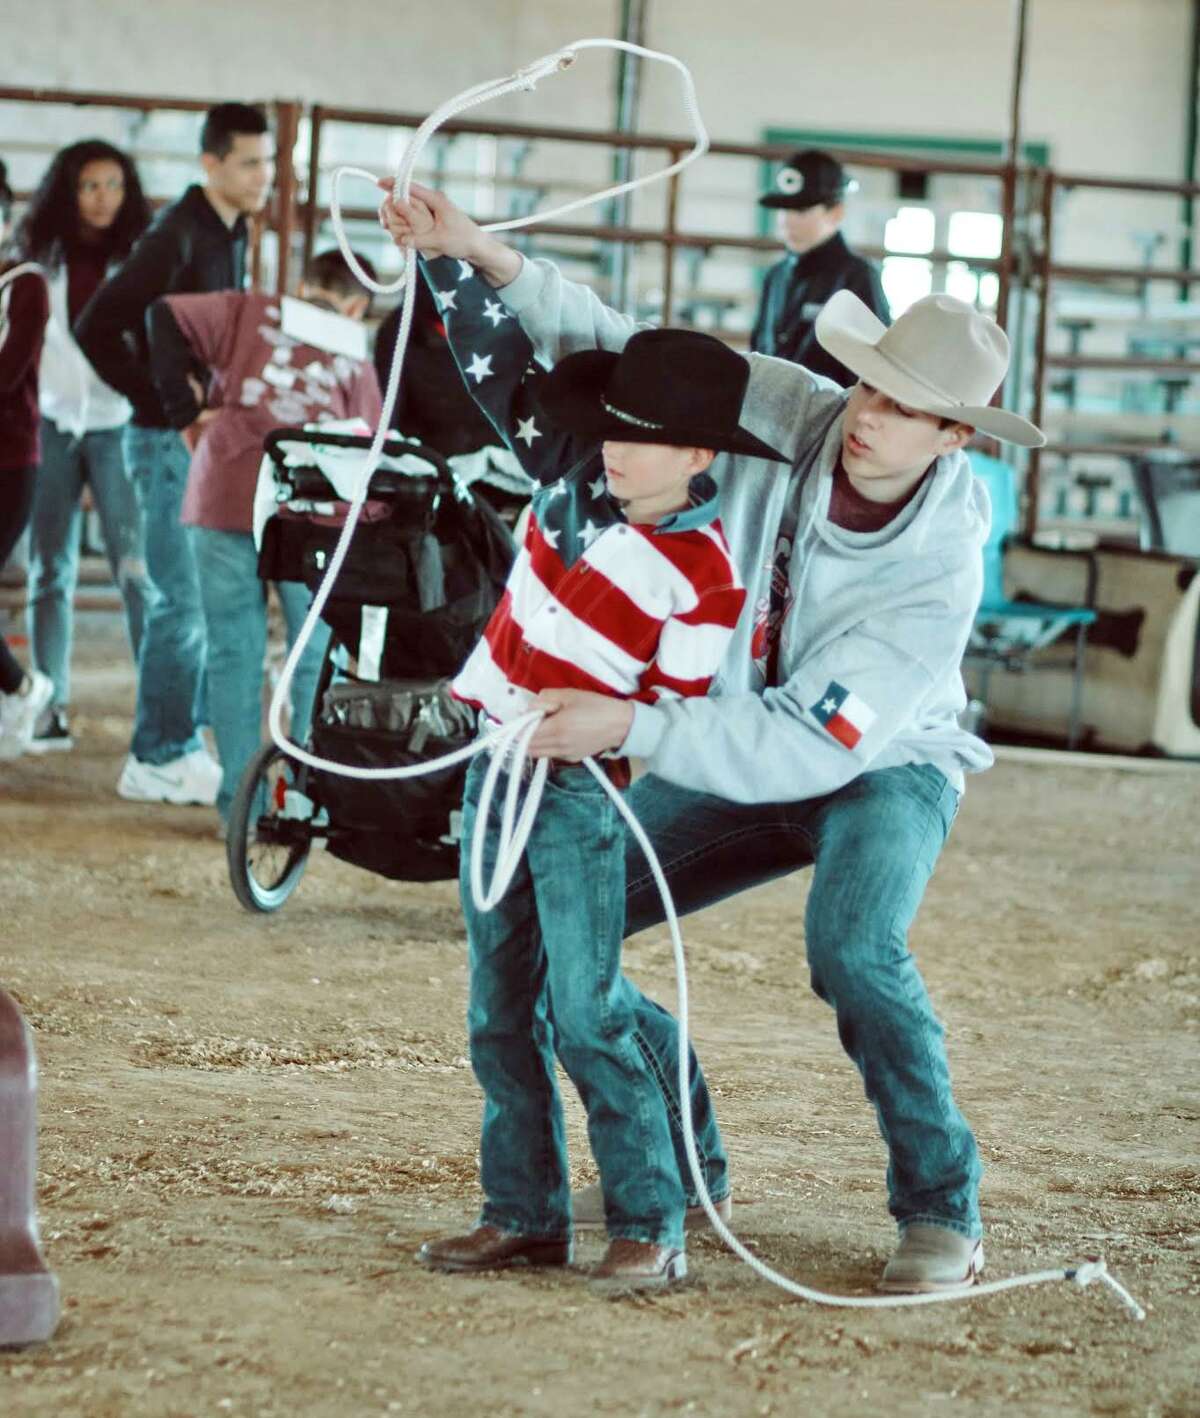 The 7th Annual Angels Rodeo for special needs children took place on Sunday at the Montgomery County Fairgrounds. The Montgomery County 4-H Horsemanship Club hosted the one-of-a-kind event to allow special needs children to enjoy rodeo events specially designed for them.